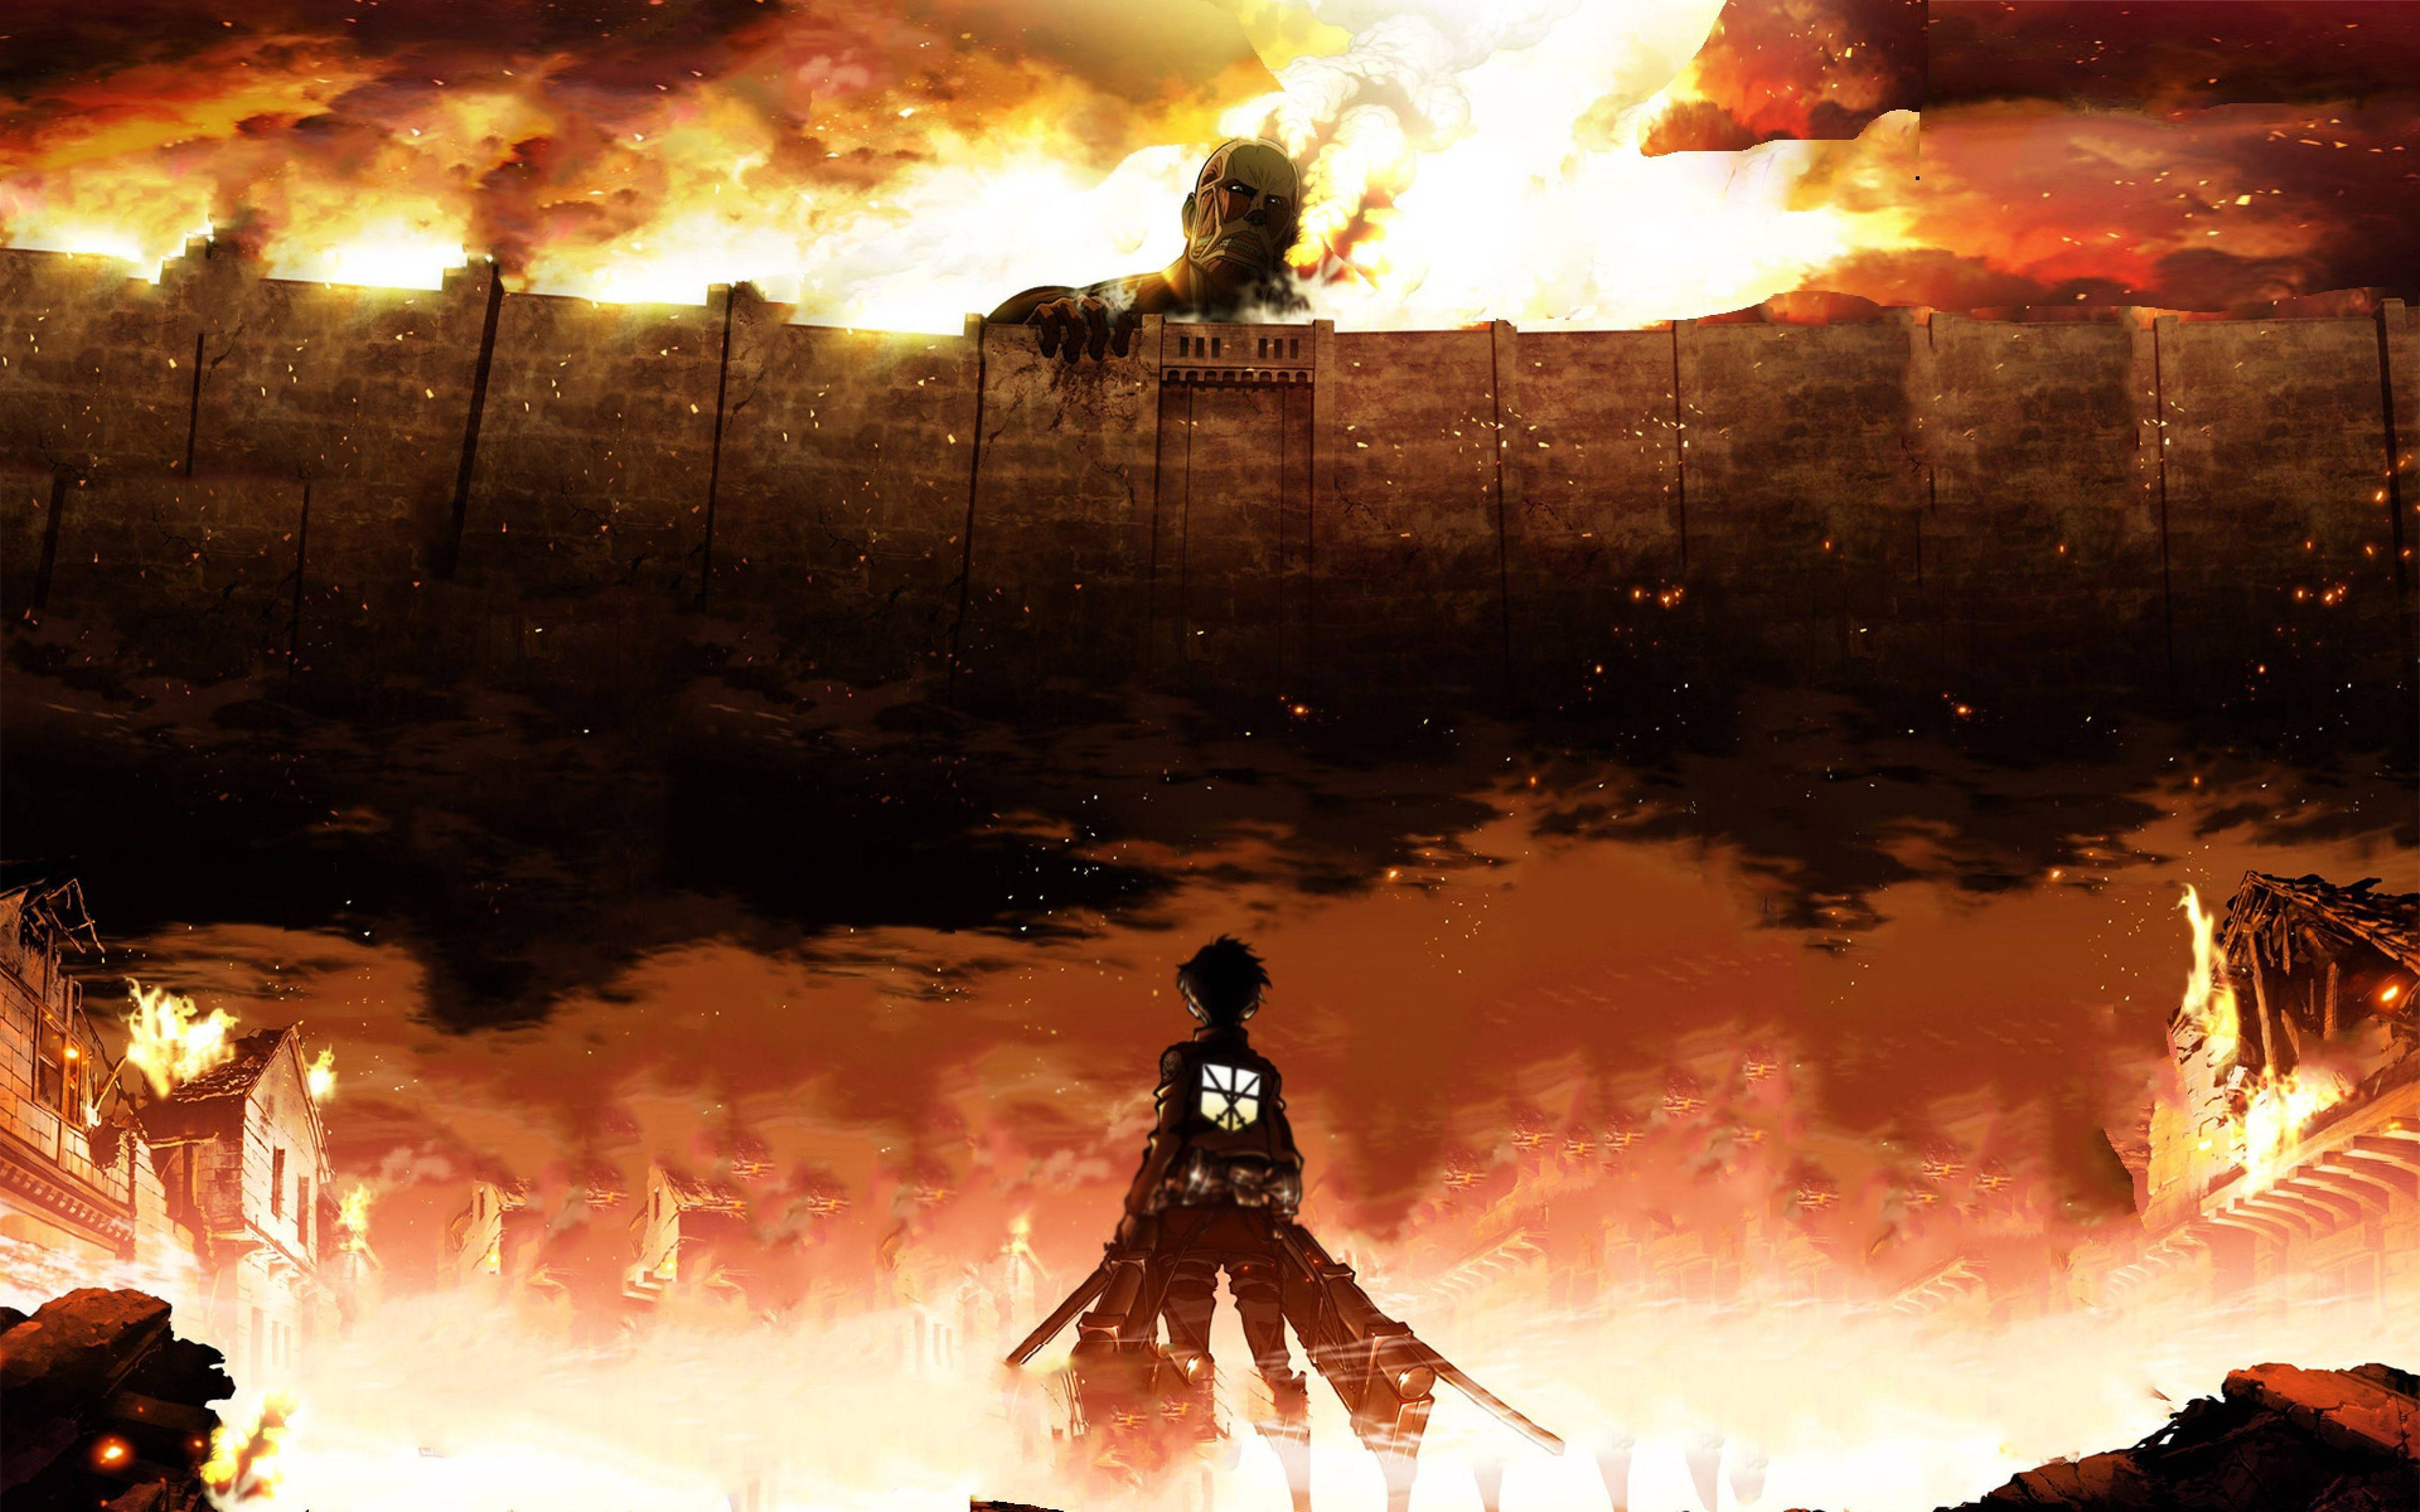 Intense Moment From Attack On Titans 4k, Featuring Eren In Steam Titan Form